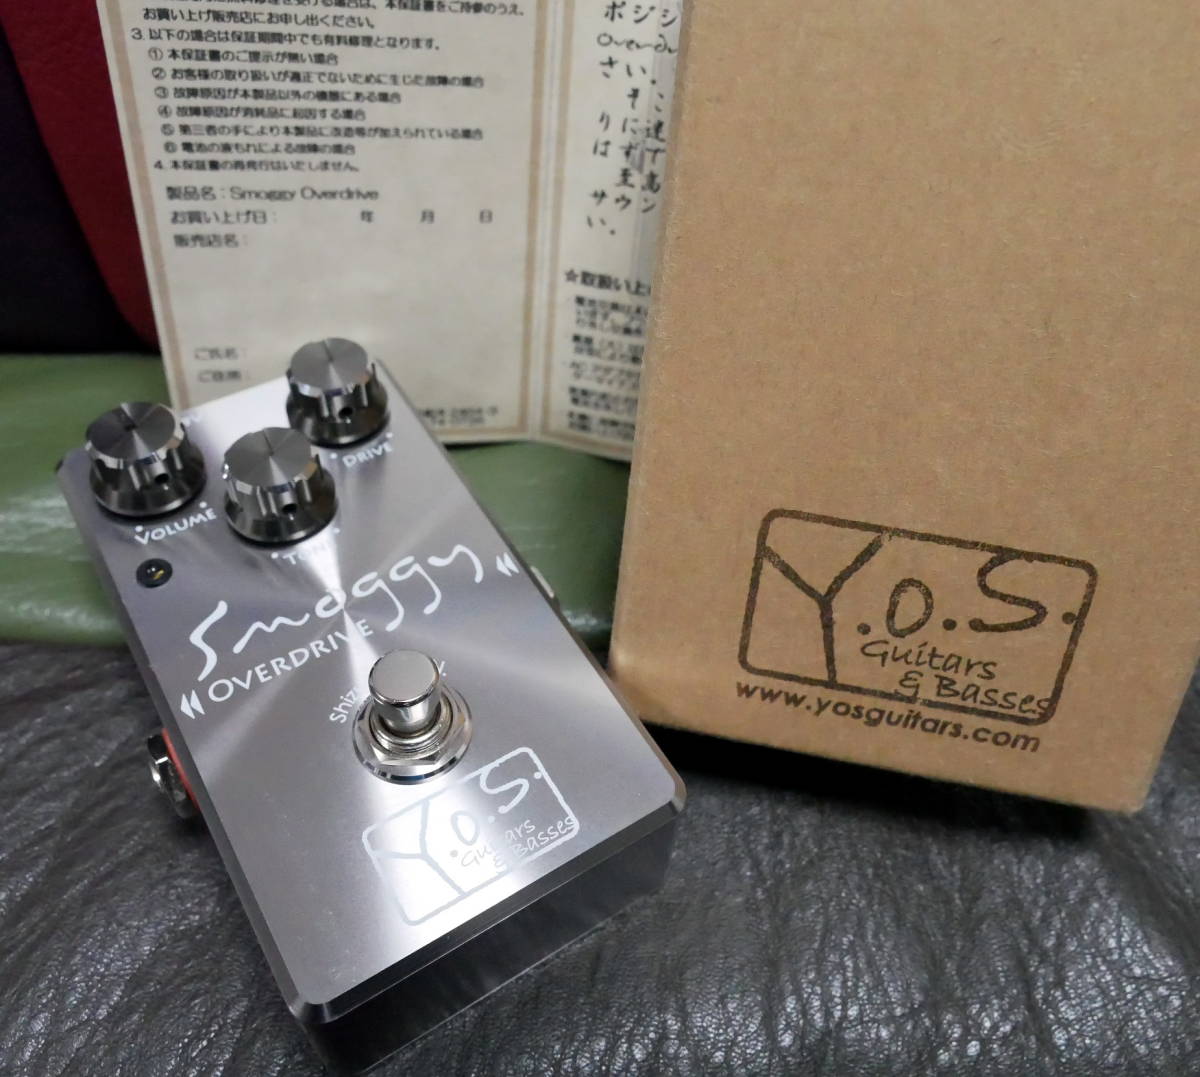 ☆ Y.O.S.ギター工房 Smoggy OVERDRIVE レアな逸品 - 楽器、器材